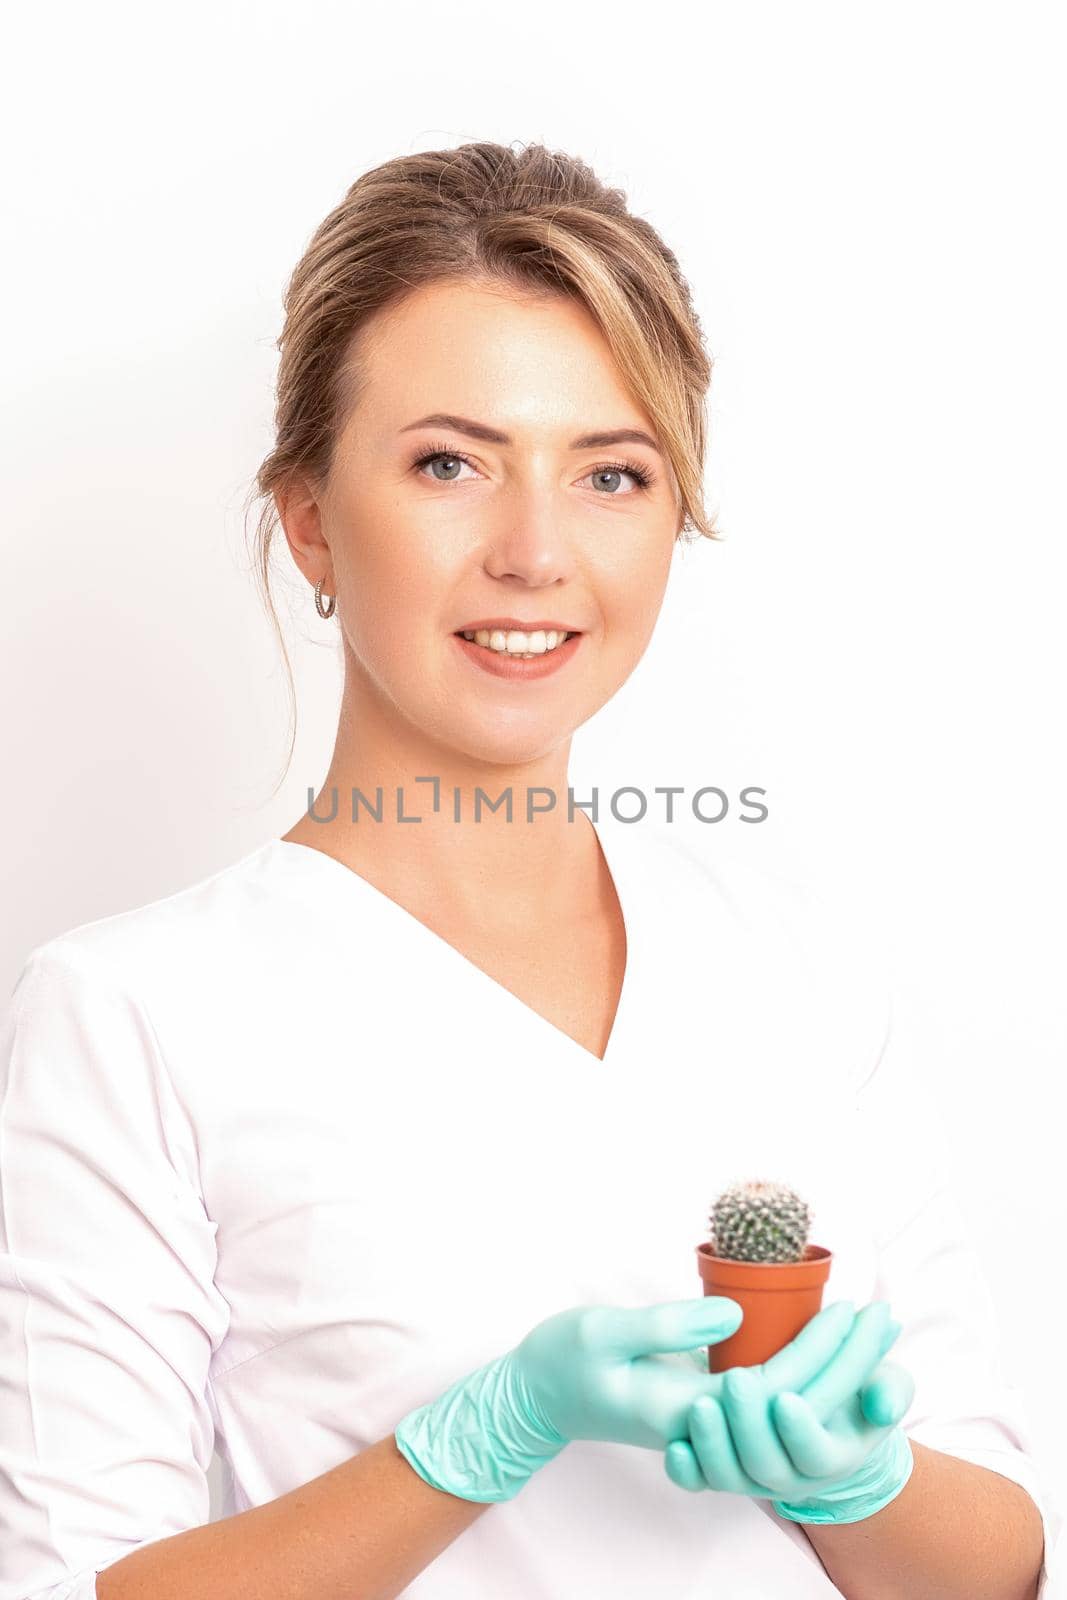 A portrait of a smiling female holds little green cactus in her hands. Hair removal concept. by okskukuruza